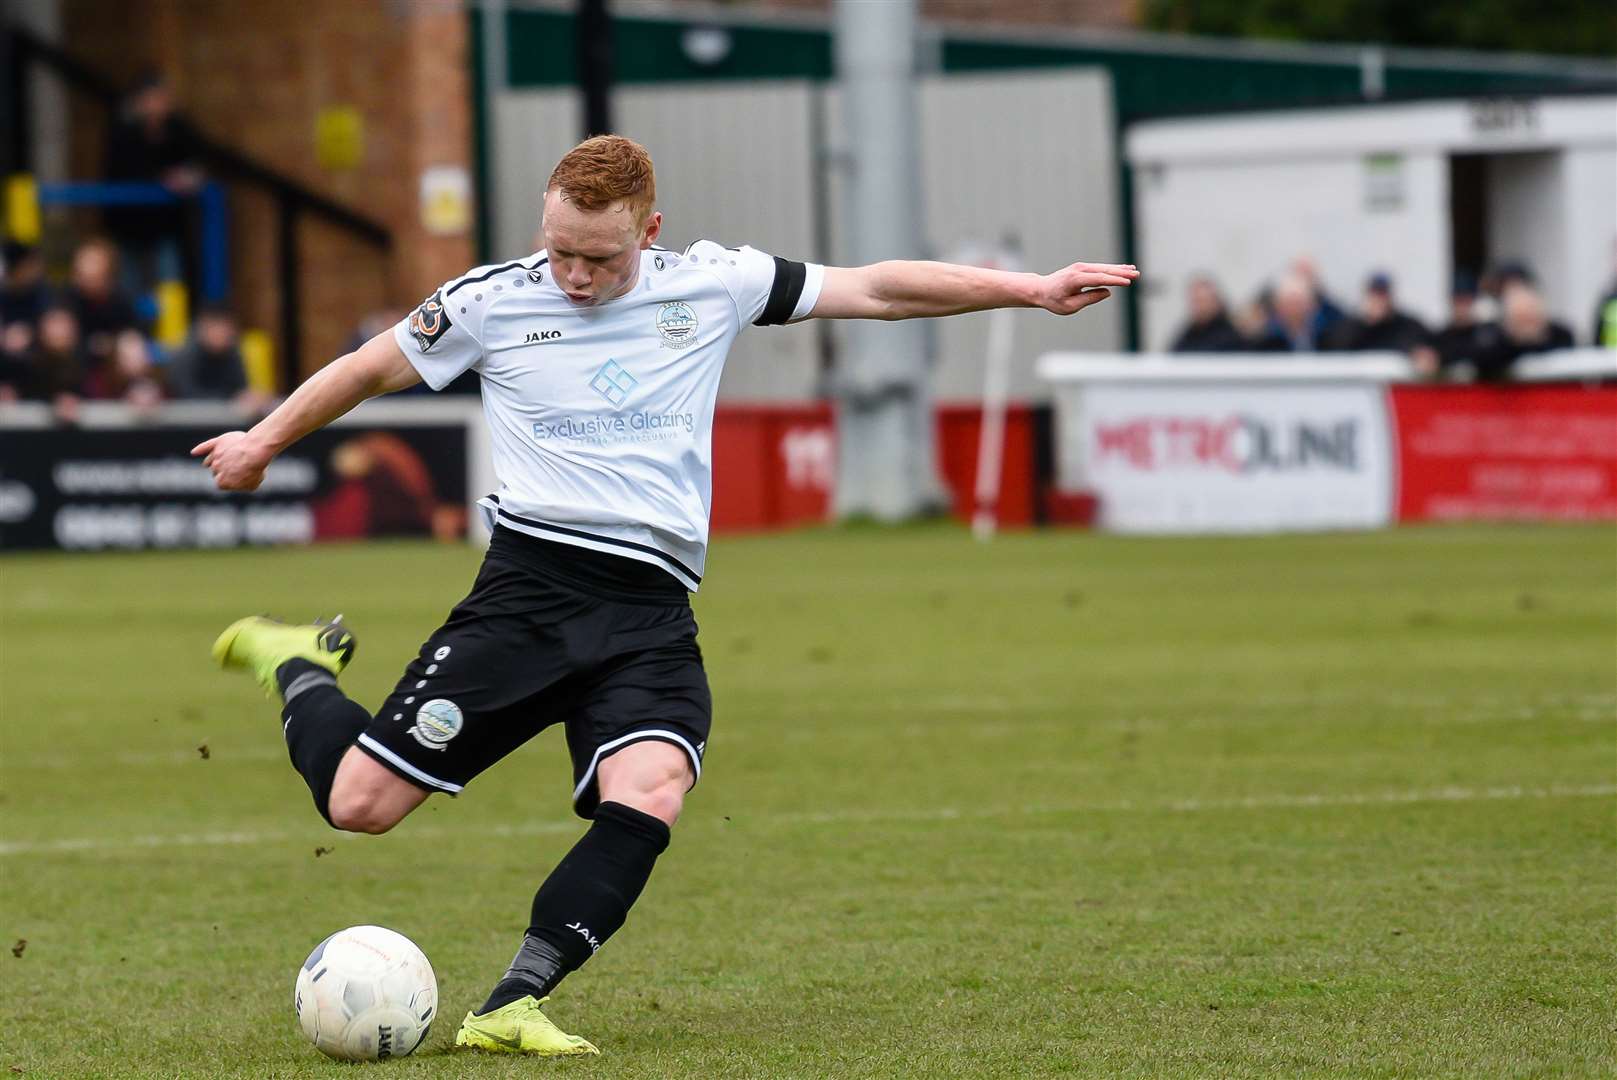 Midfielder Michael Woods has joined National North side York City Picture: Alan Langley